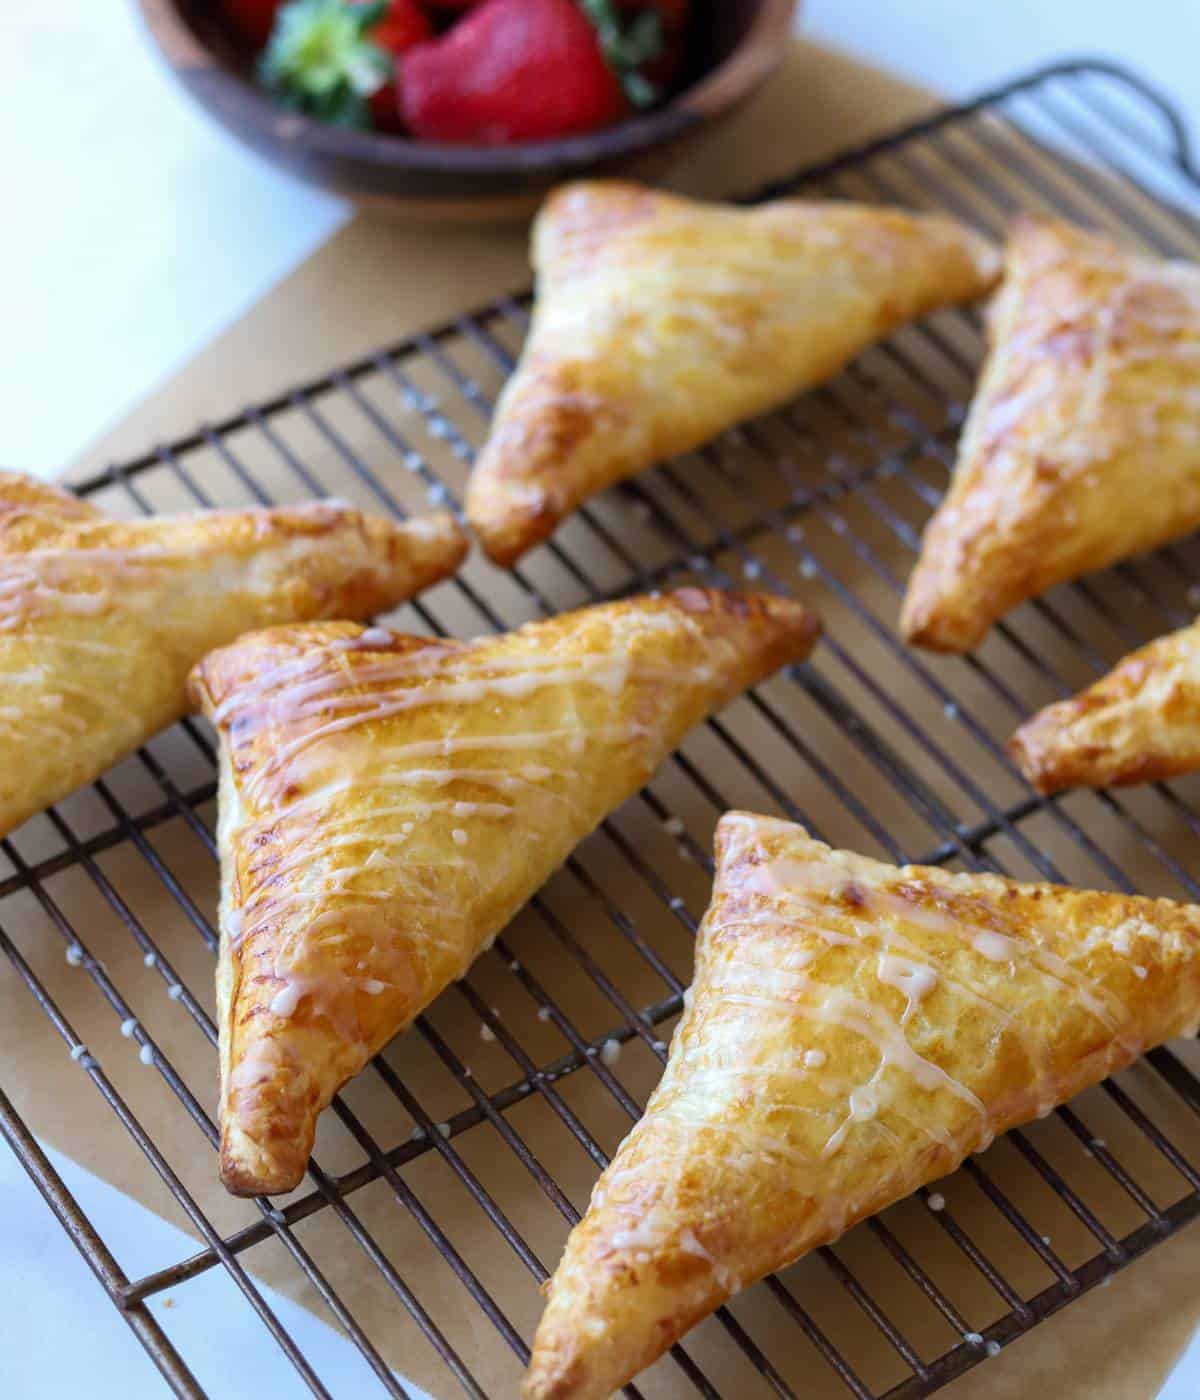 Strawberry turnover pastries on tray.